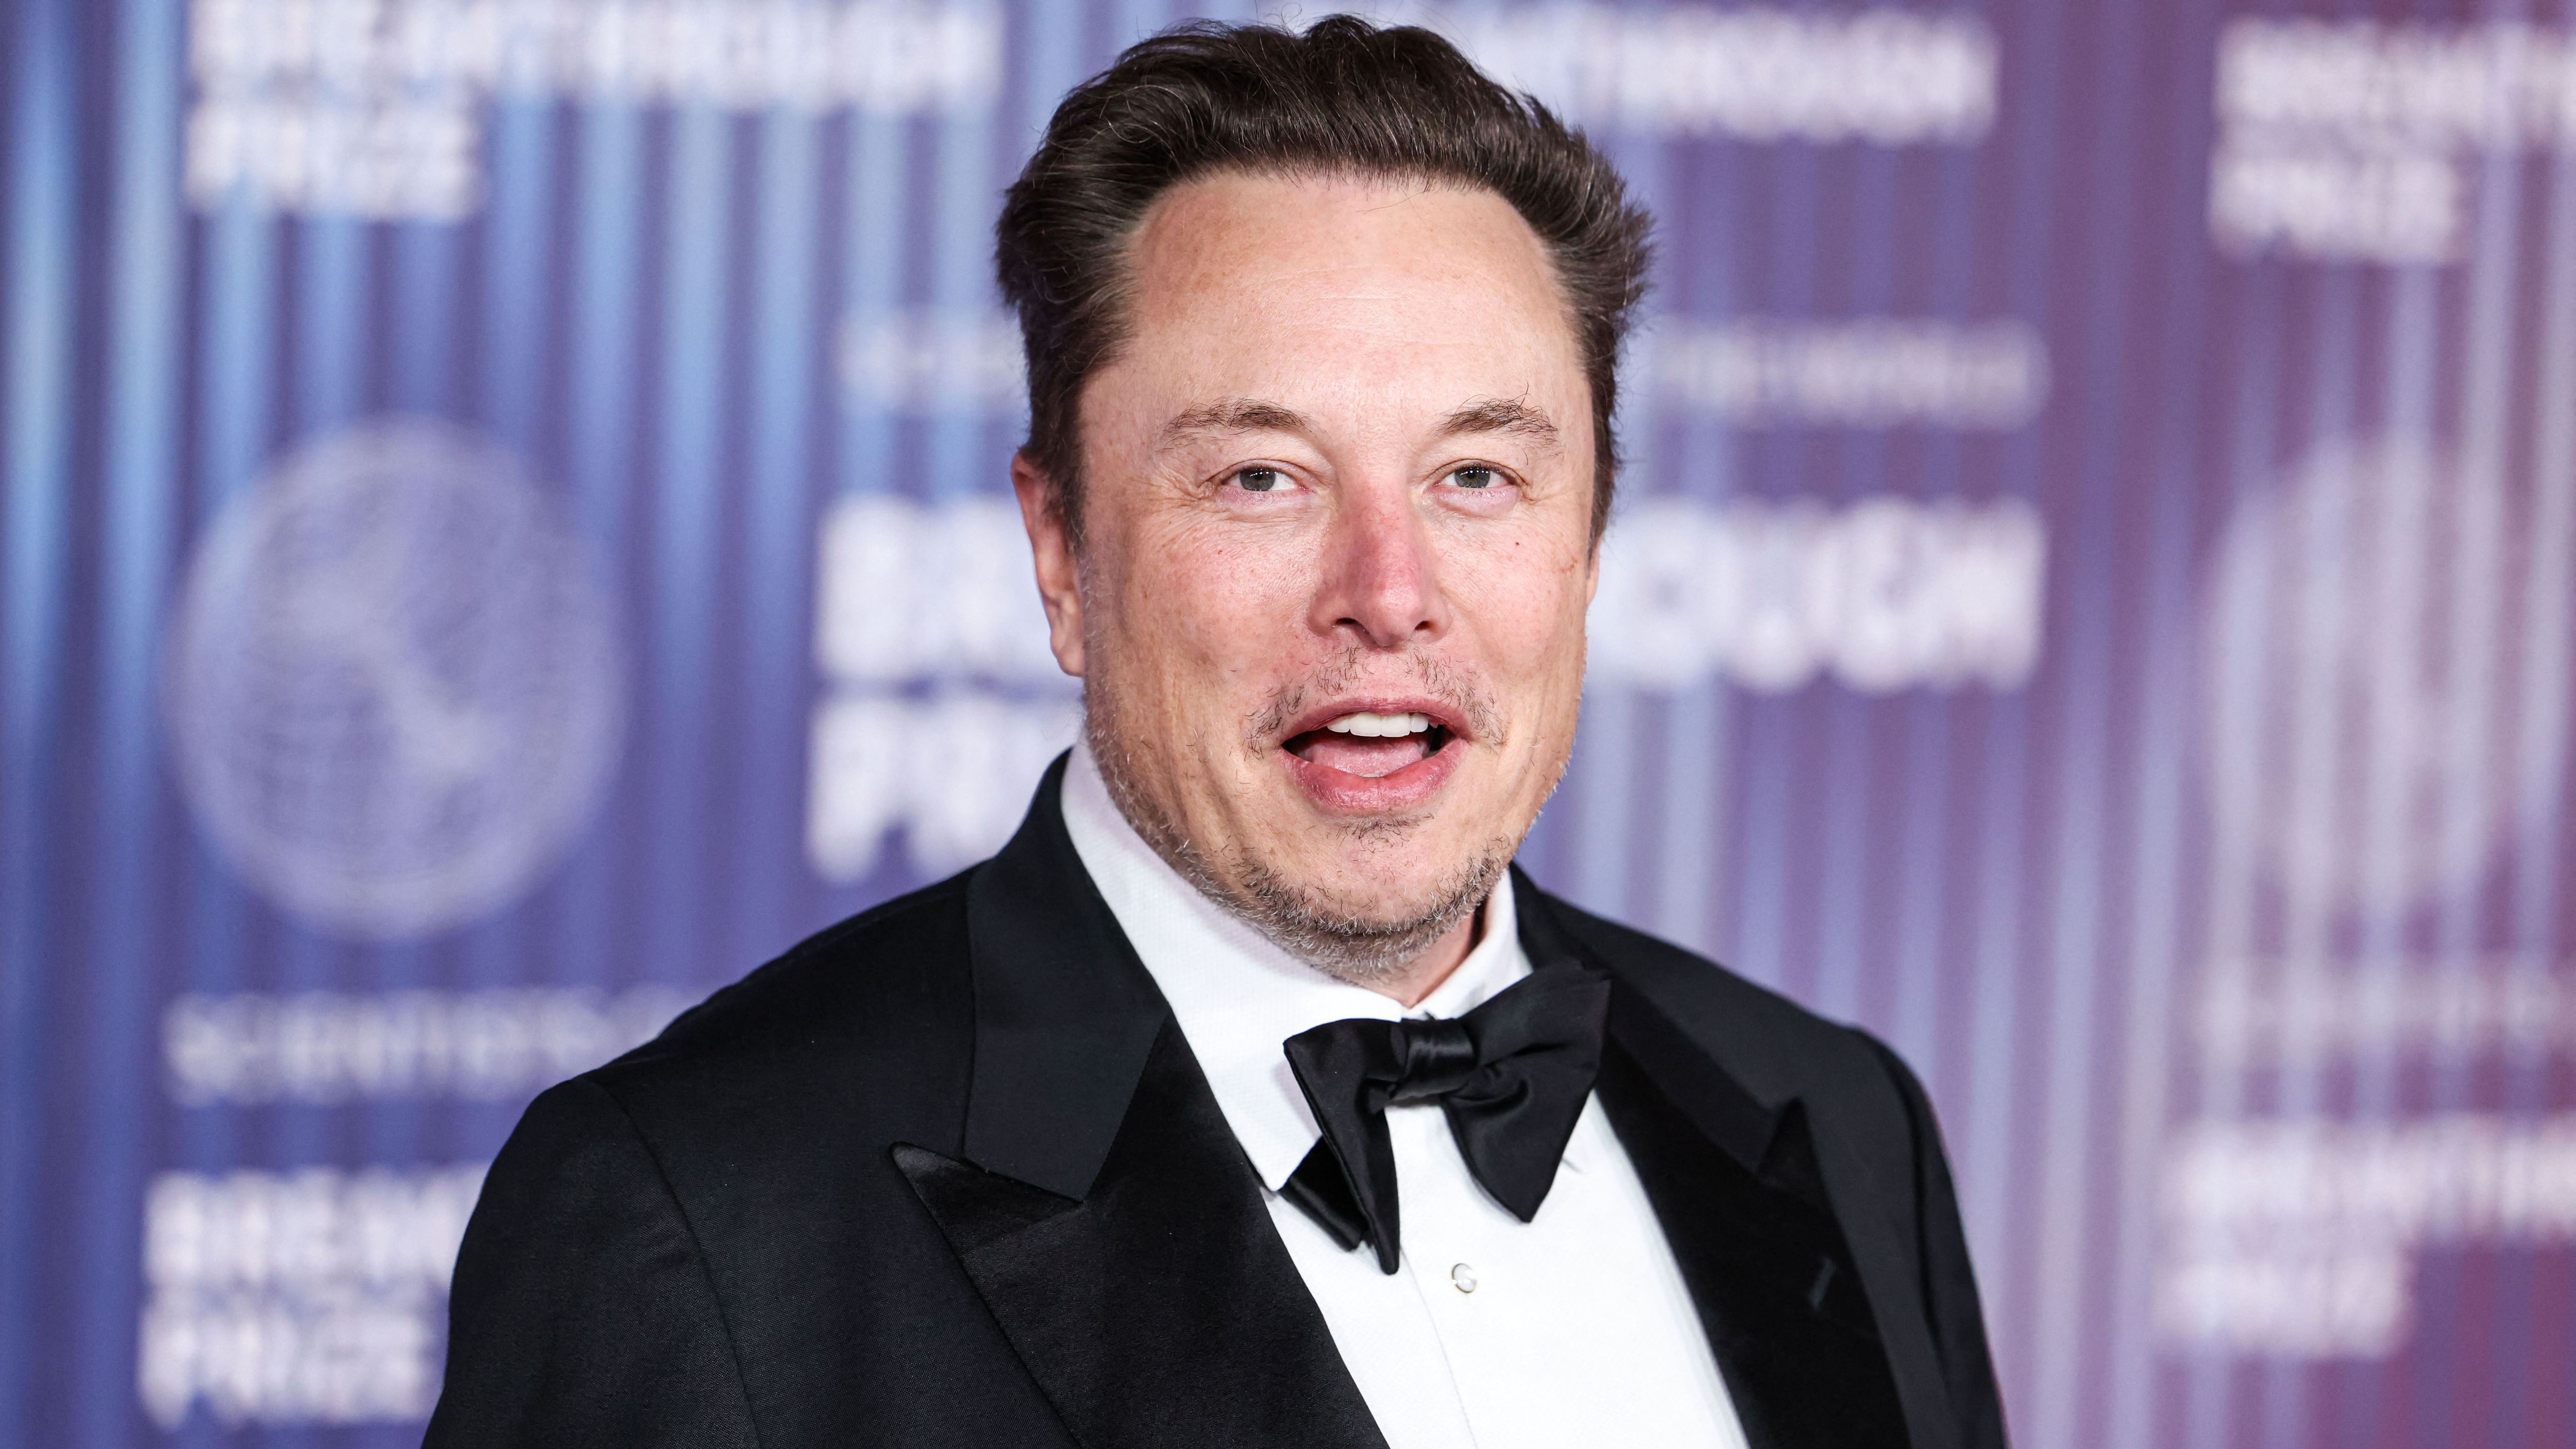 Elon Musk suggested the fee would be in place for the first three months after a user joins the platform